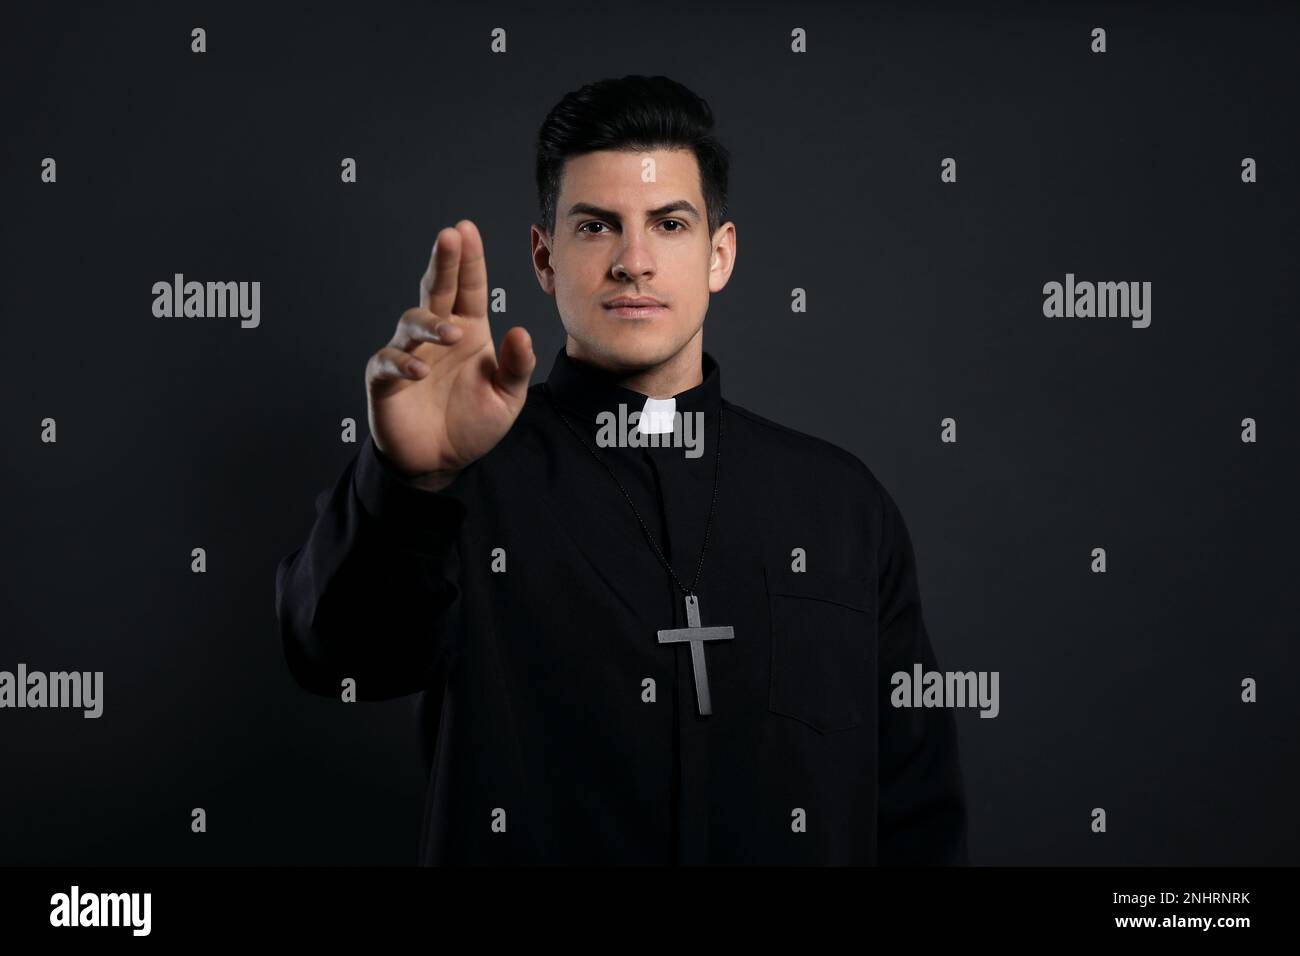 Priest making blessing gesture on black background Stock Photo